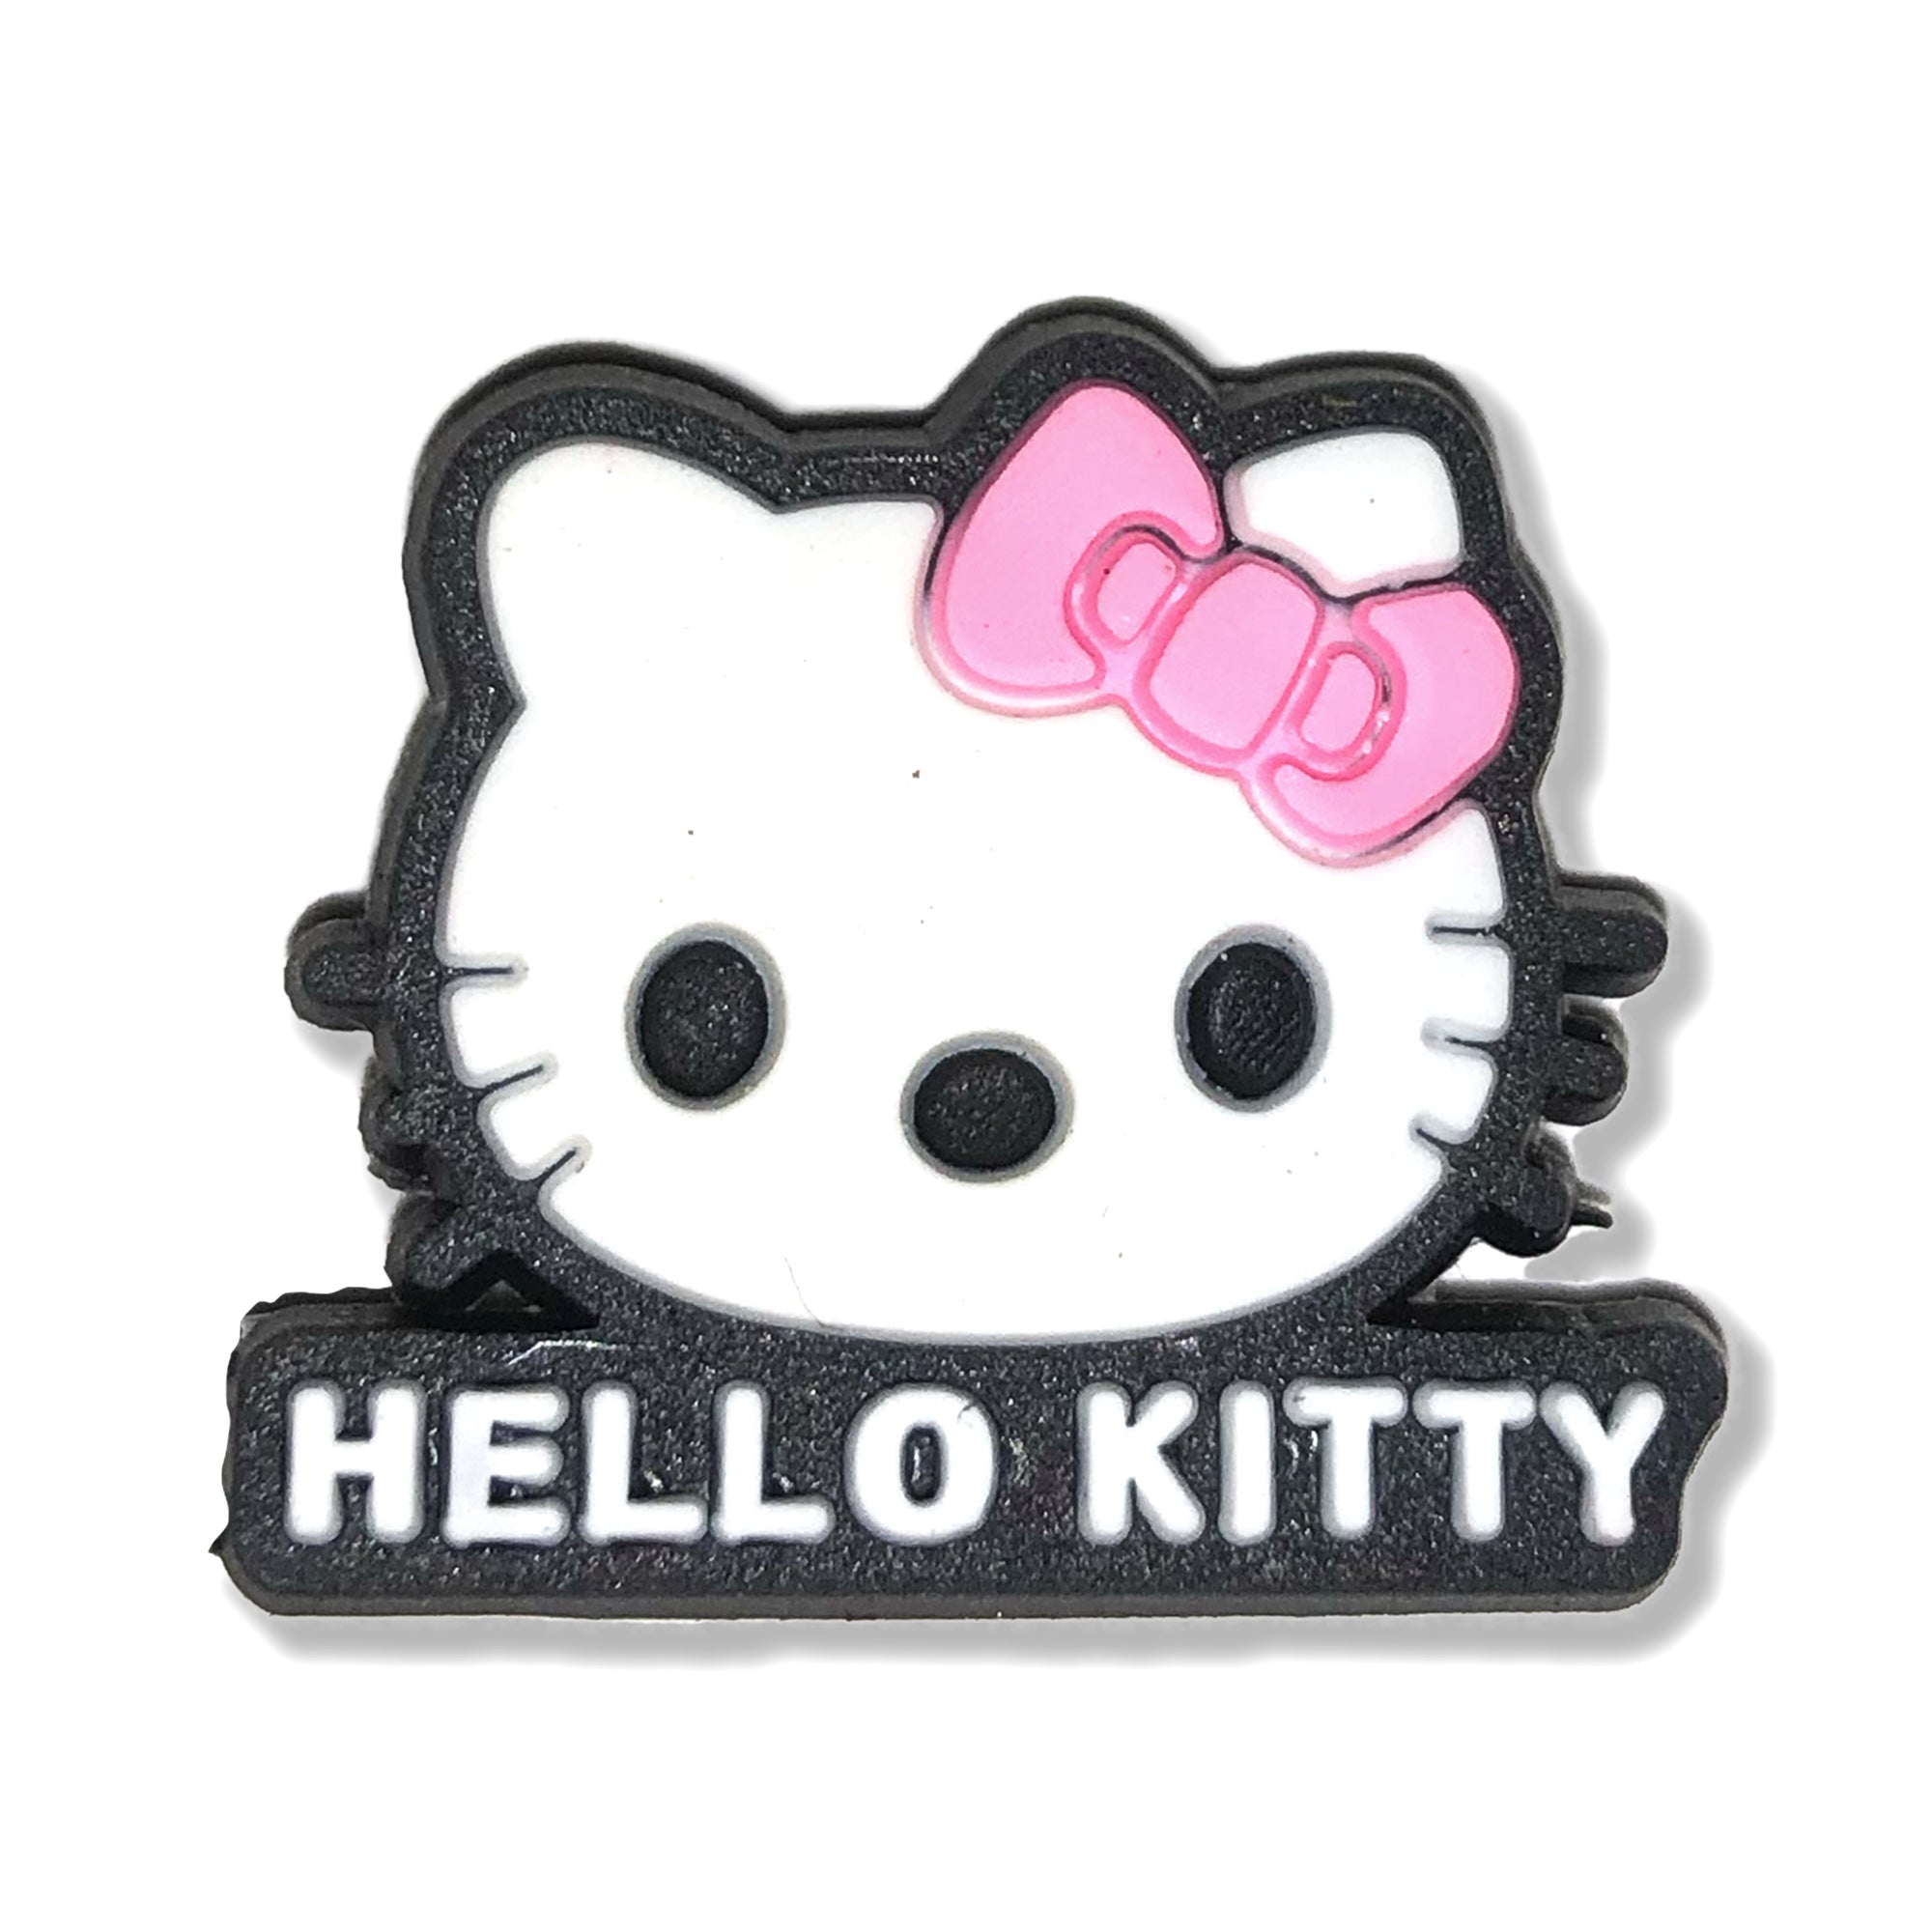 Hello Kitty Shoe Charm: Purr-fectly Adorable Footwear Fun 🐱 - Questsole